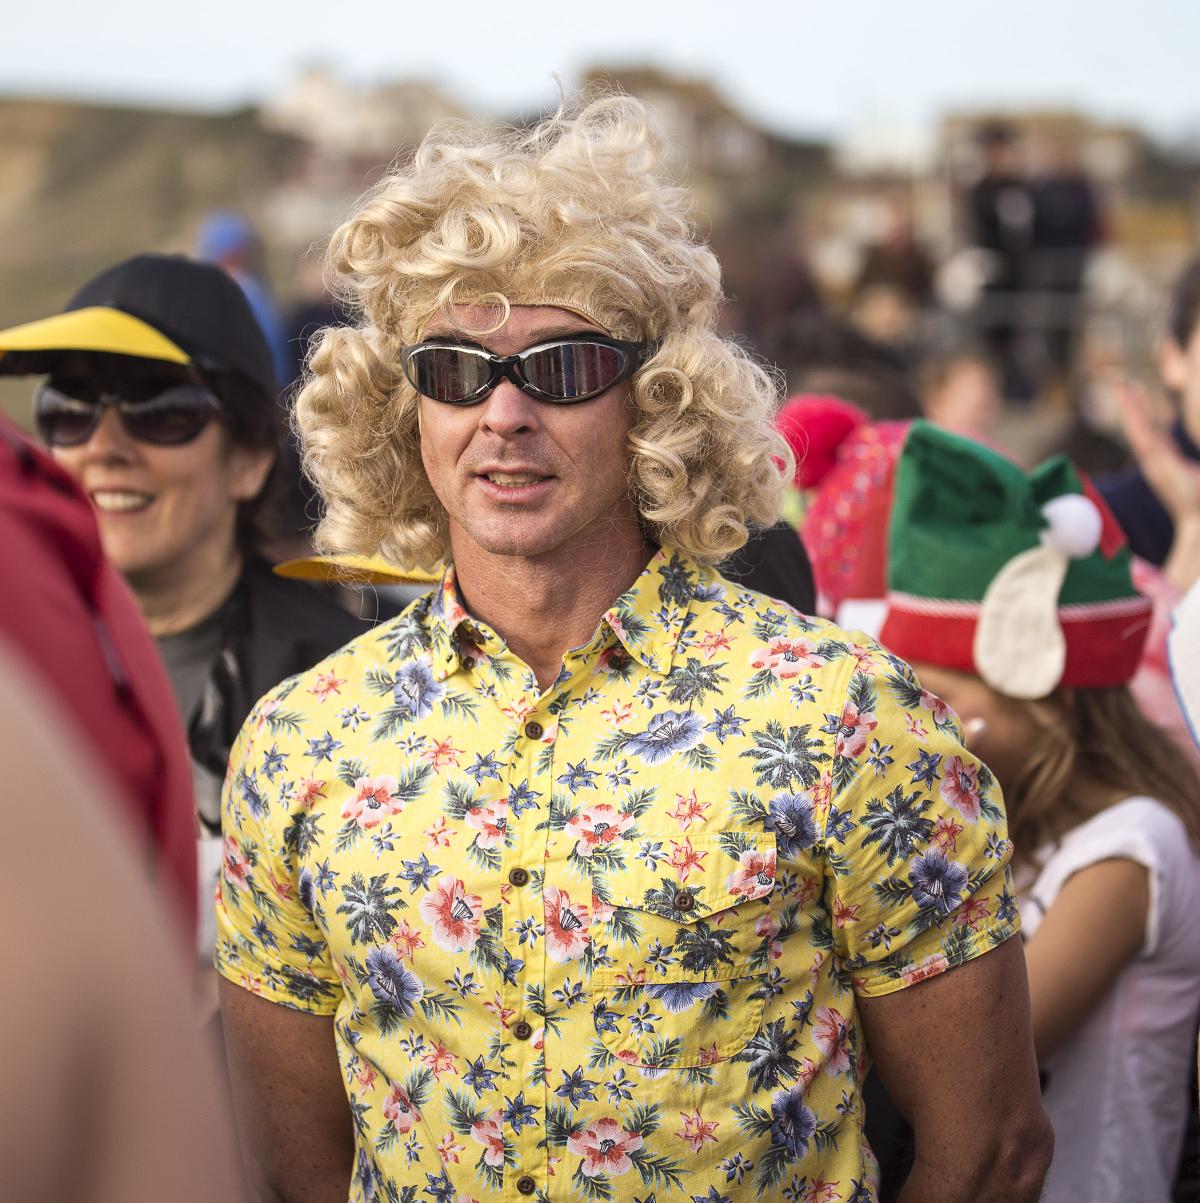 Huge crowds turned out to cheer on swimmers at West Bay Wallow 2016.